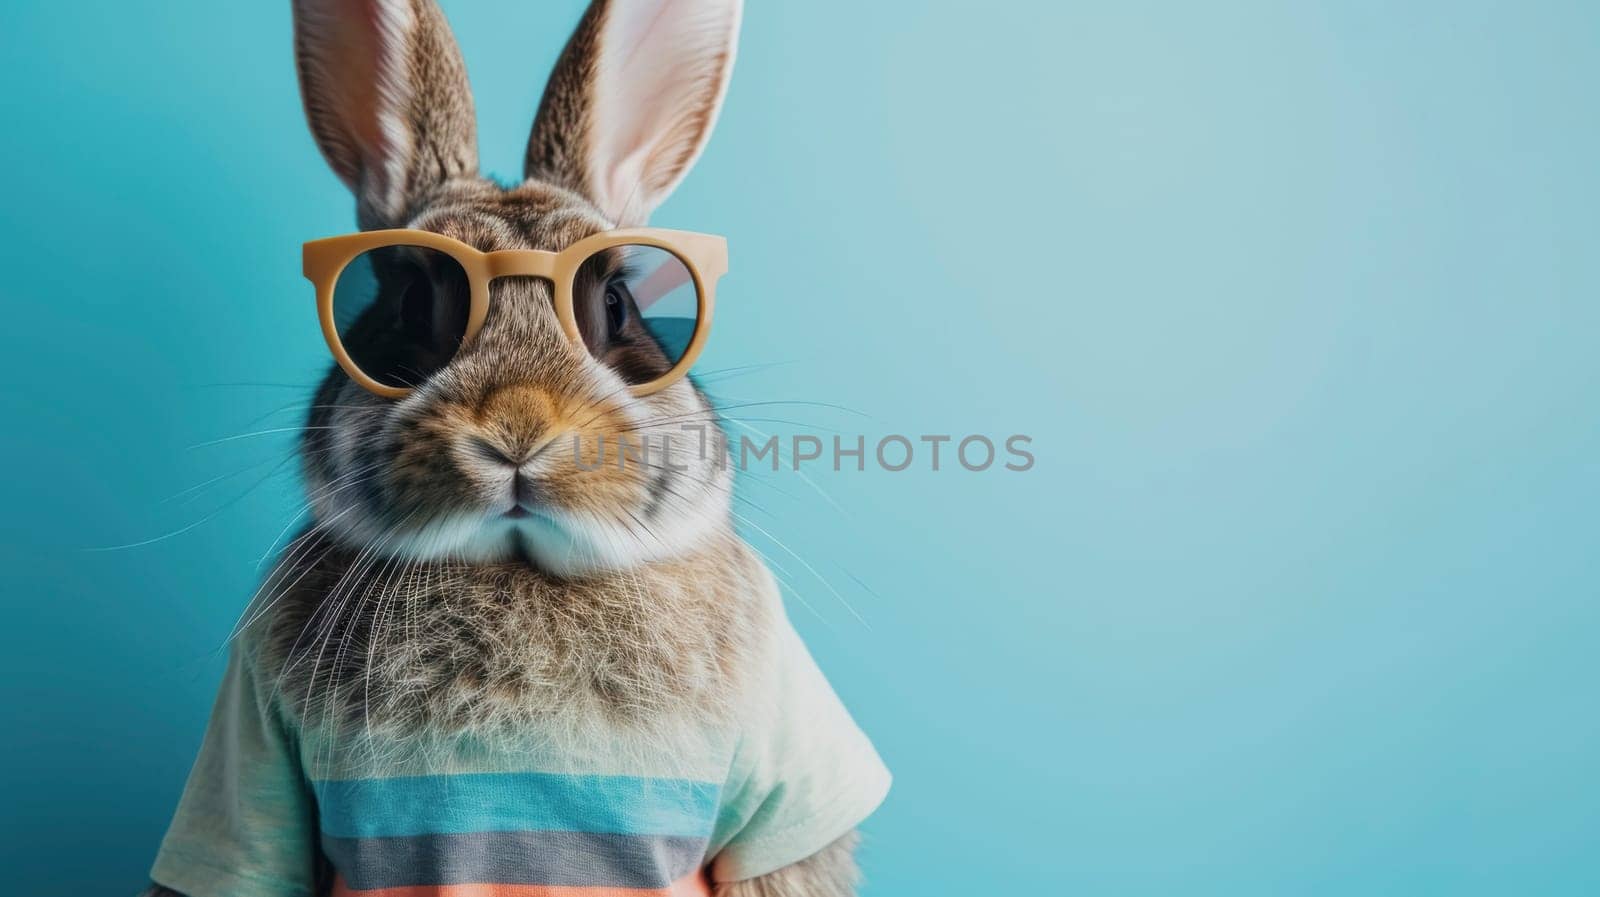 A charming rabbit sporting trendy sunglasses and a colorful striped tee against a blue background.